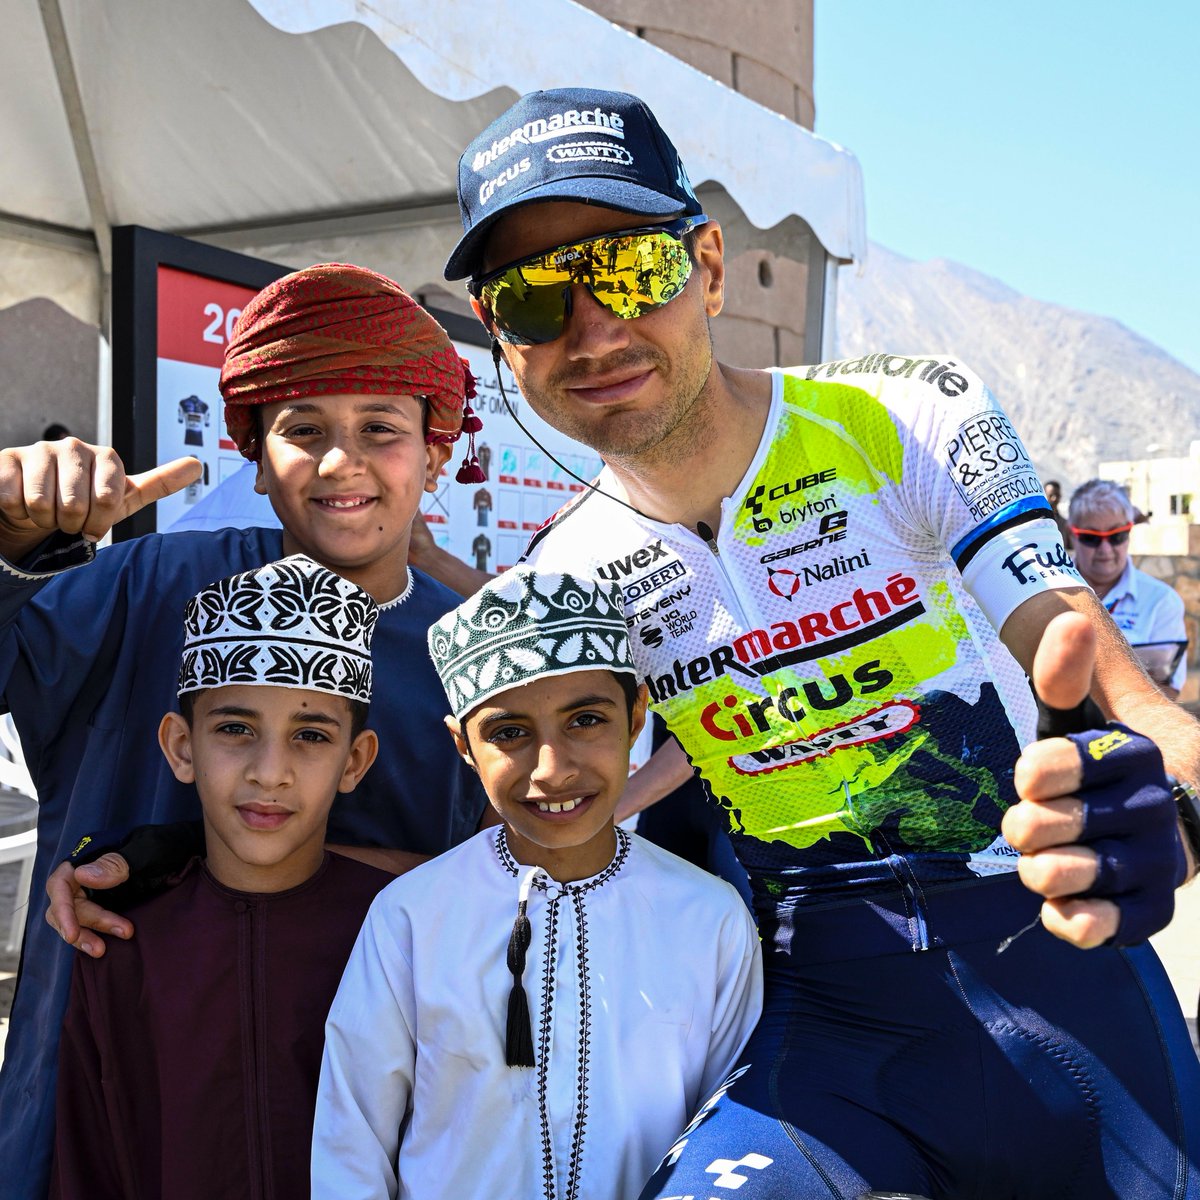 Rein Taaramäe finishes 4th overall of Tour Of Oman after an impressive team display in Green Mountain, where Rein also took 4th place 👏

#TourofOman